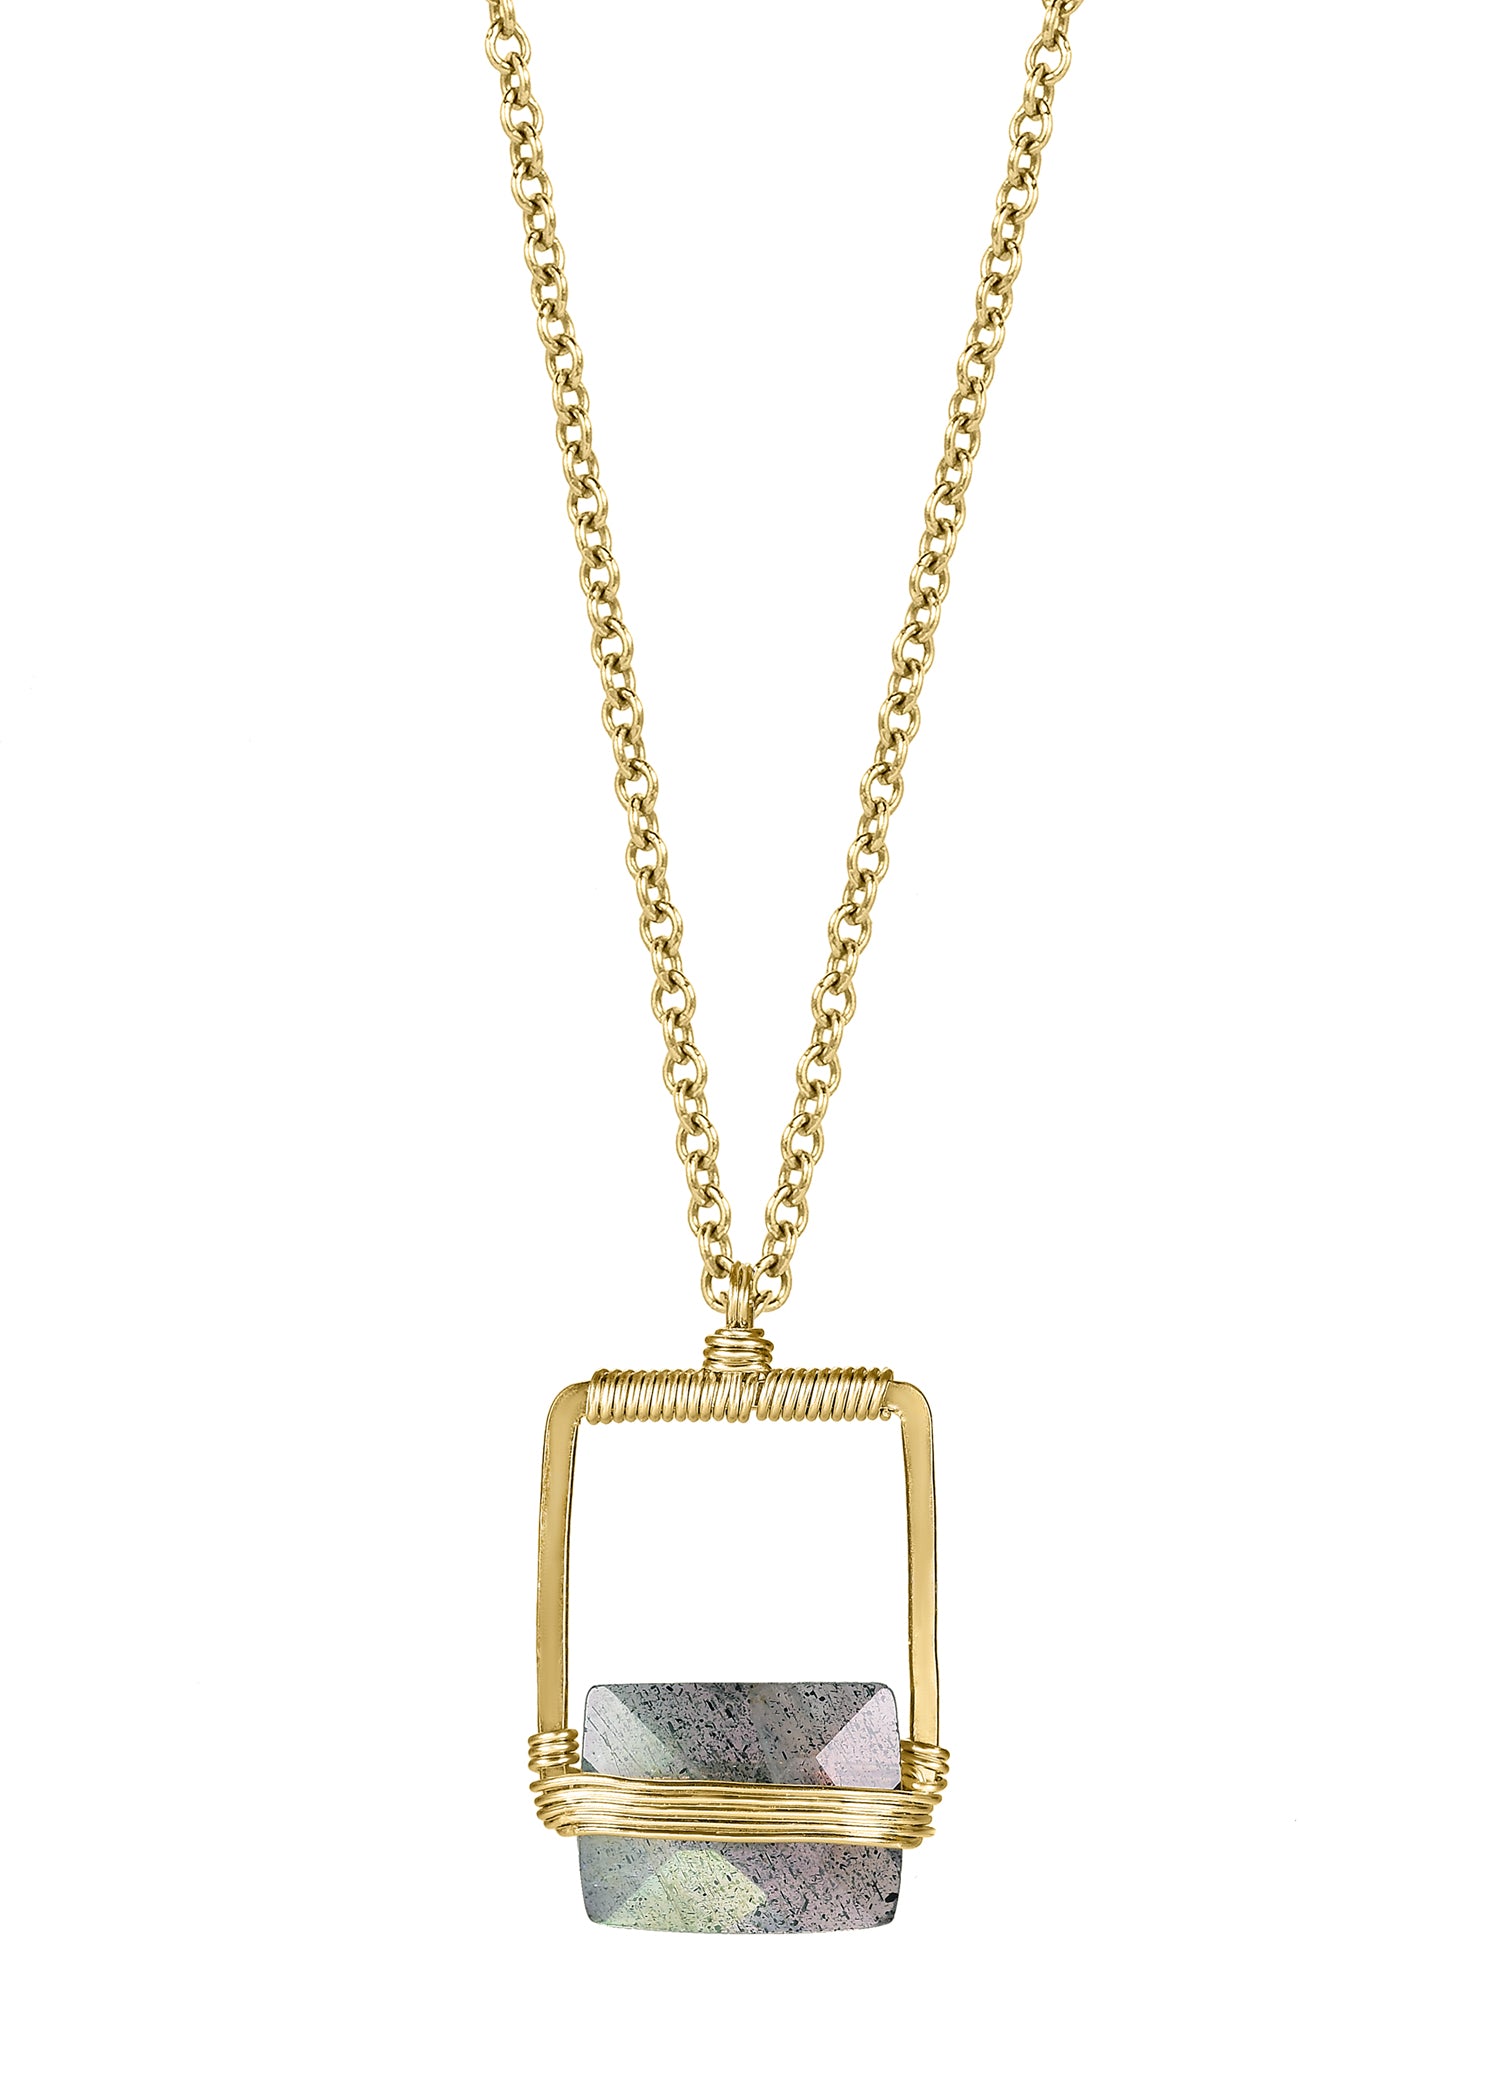 Labradorite 14k gold fill Necklace measures 16" in length Pendant measures 9/16" in length and 3/8" in width at the widest point Handmade in our Los Angeles studio